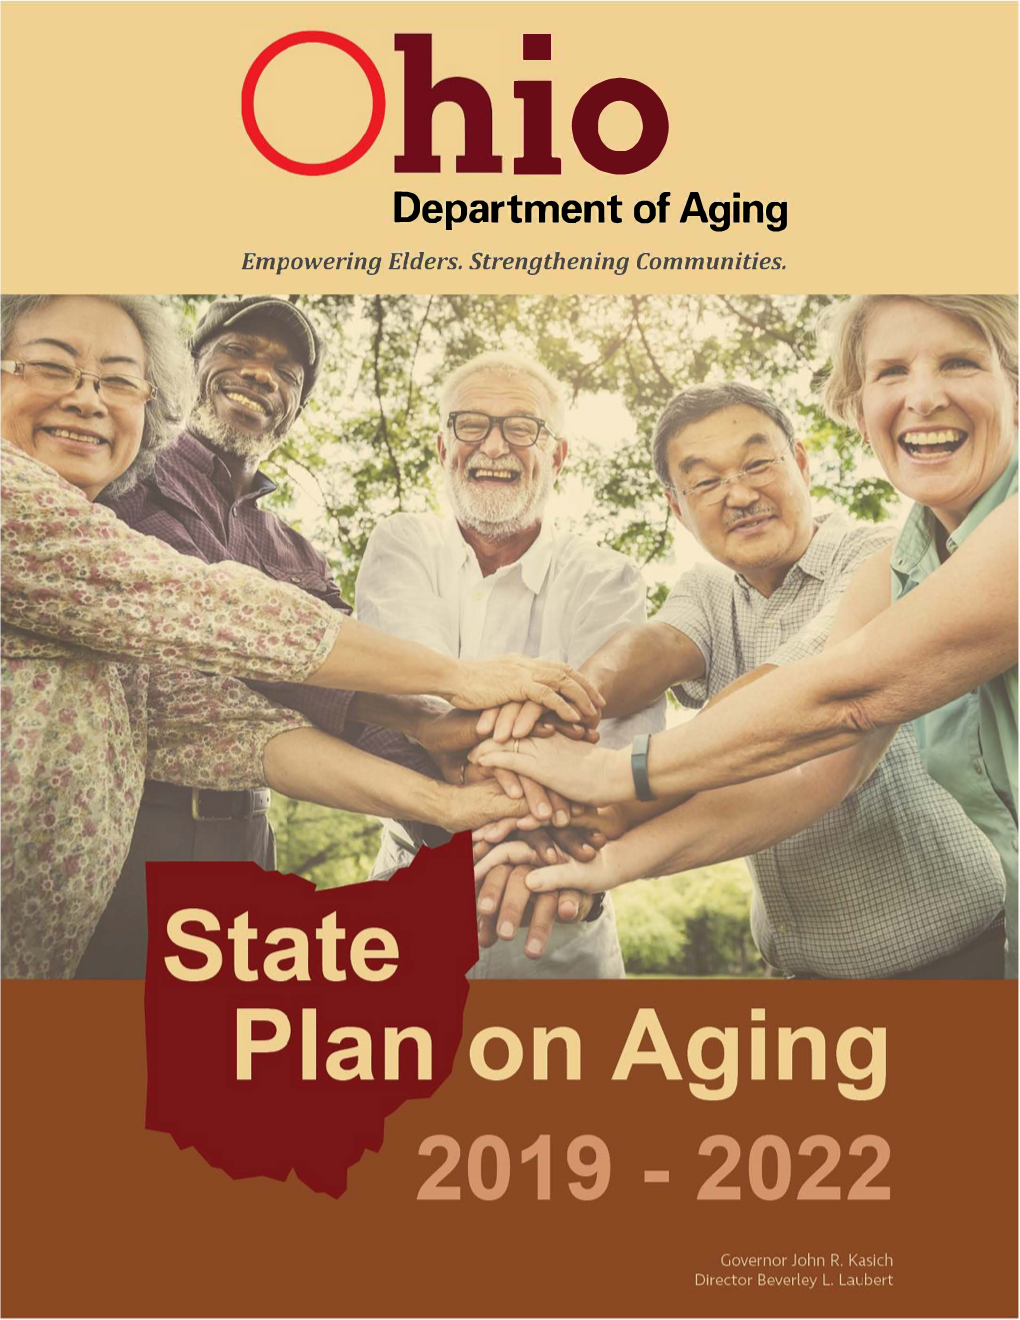 Ohio State Plan on Aging 2019-2022